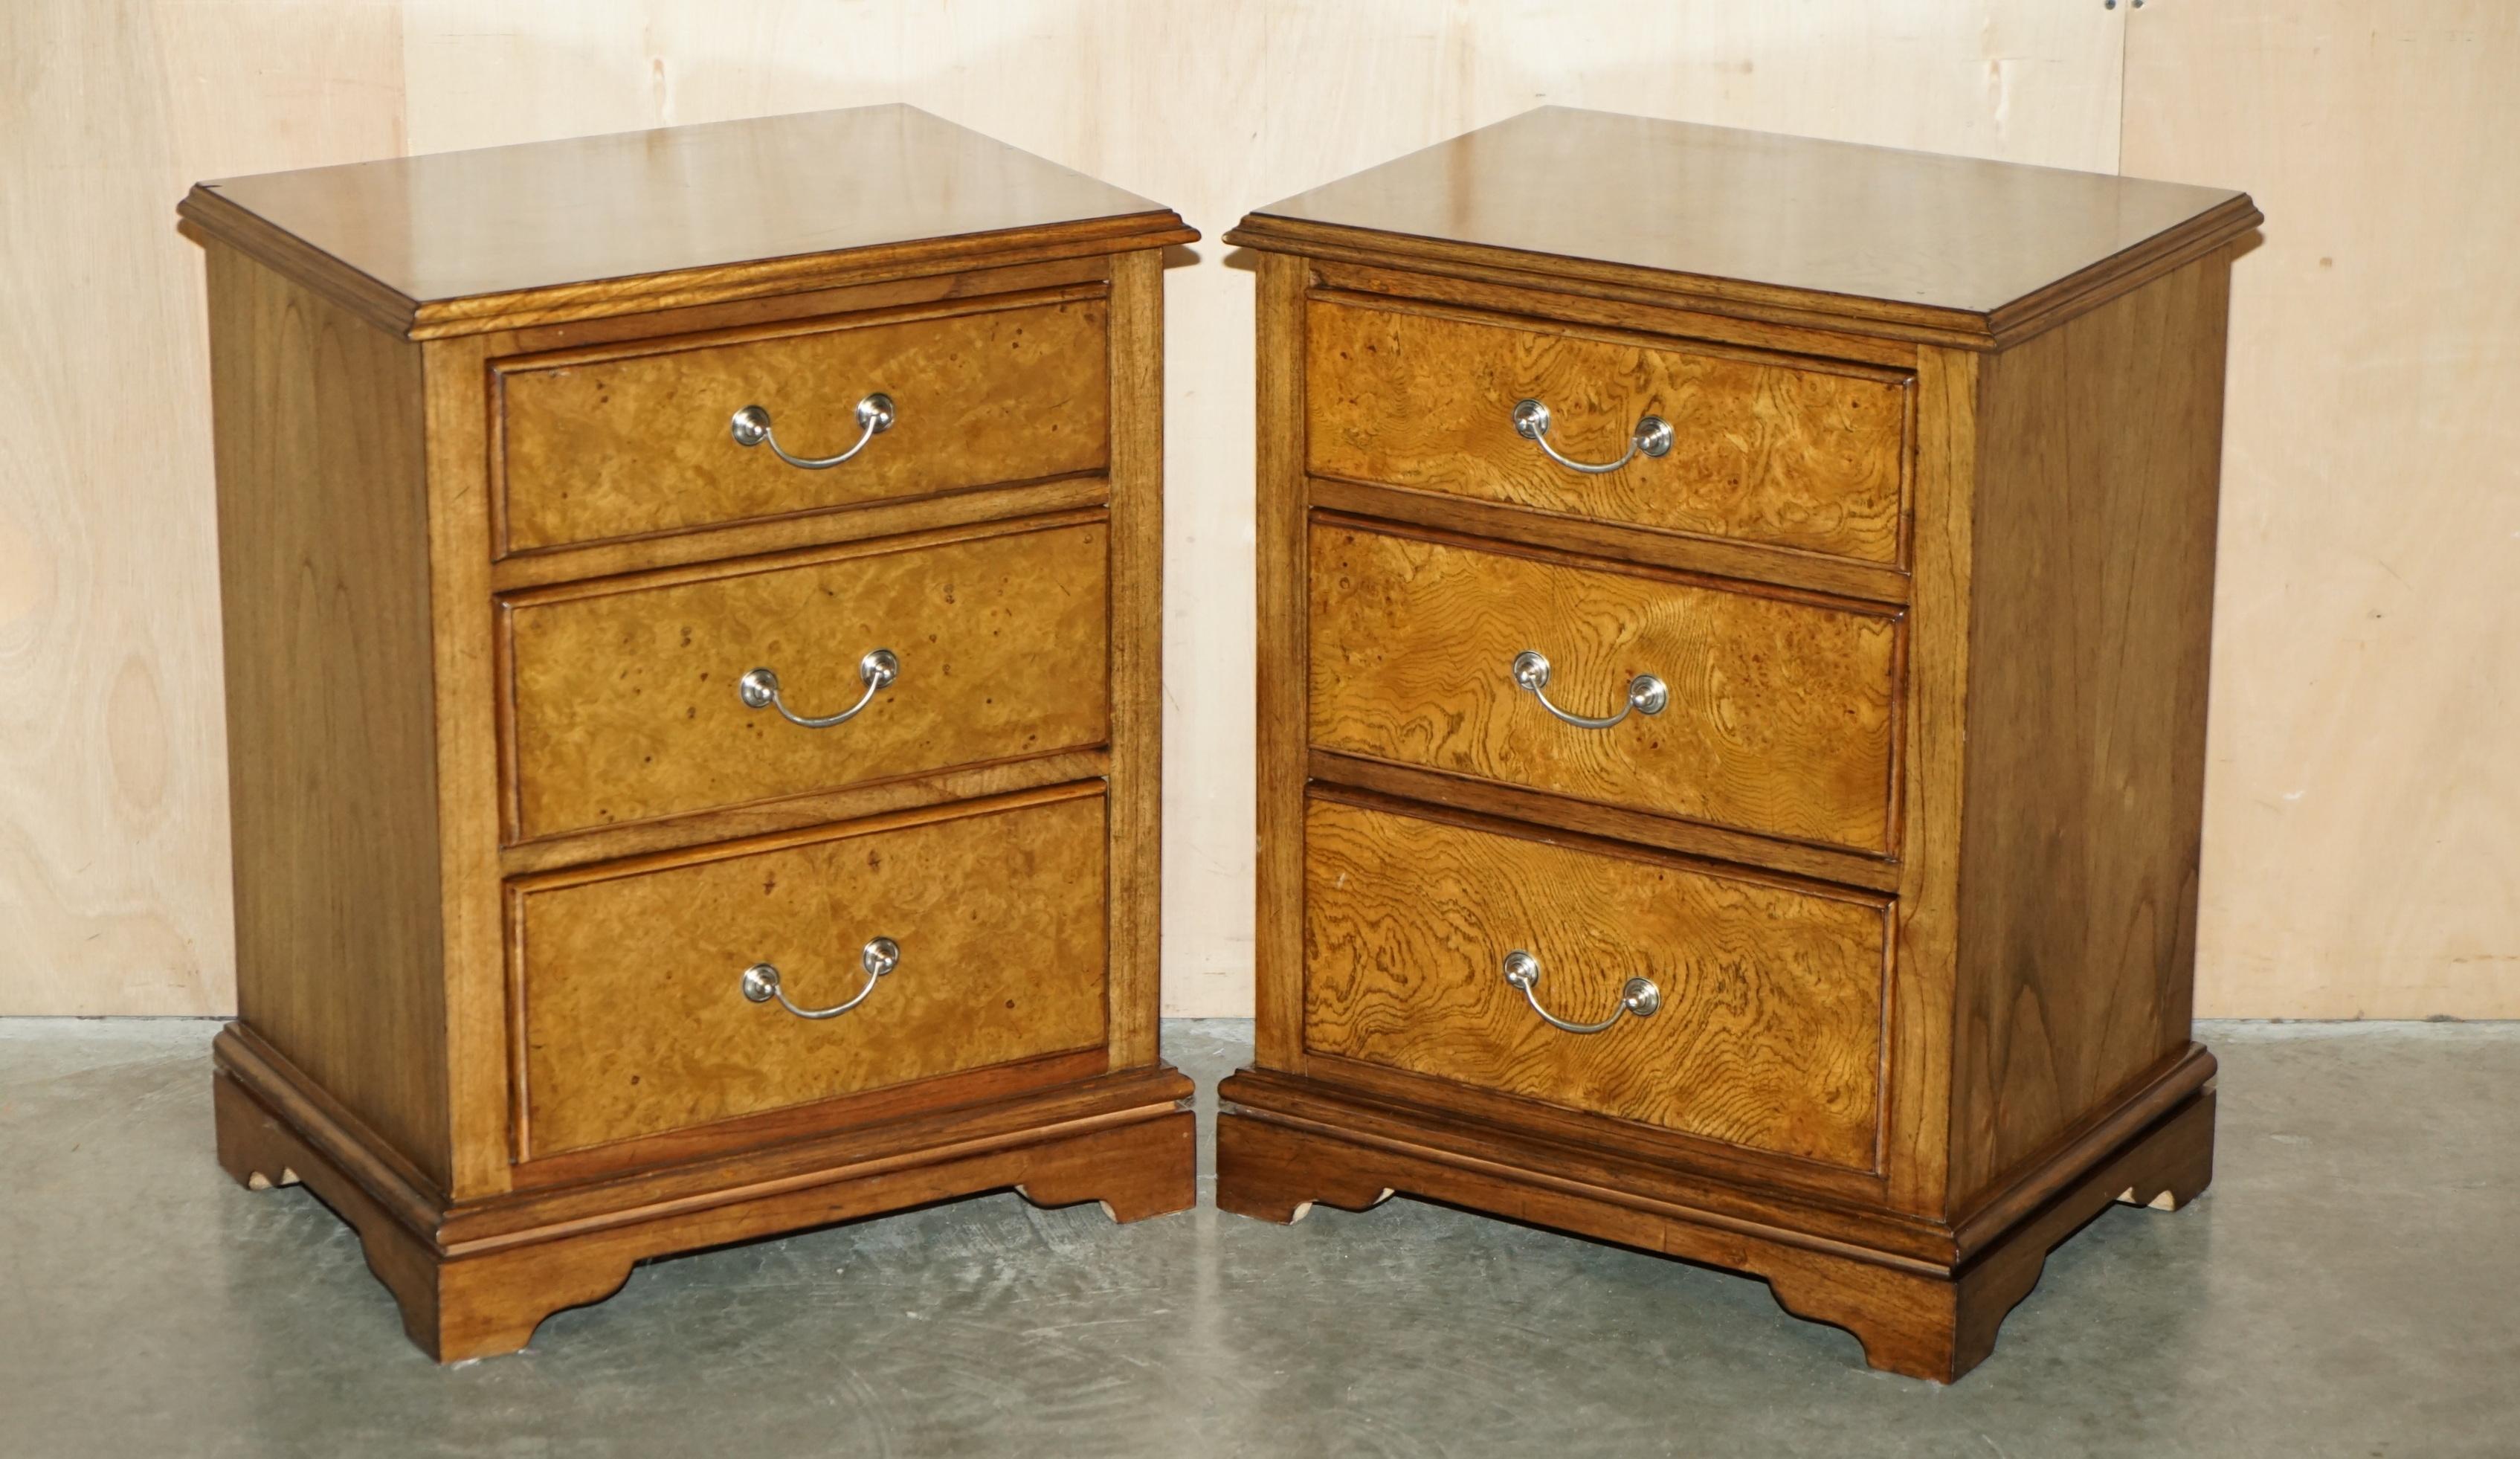 Royal House Antiques

Royal House Antiques is delighted to offer for sale this stunning suite of Frank Hudson Burr Elm bedroom furniture to include a large two over three chest of drawers and pair of bedside table nightstand drawers

Please note the